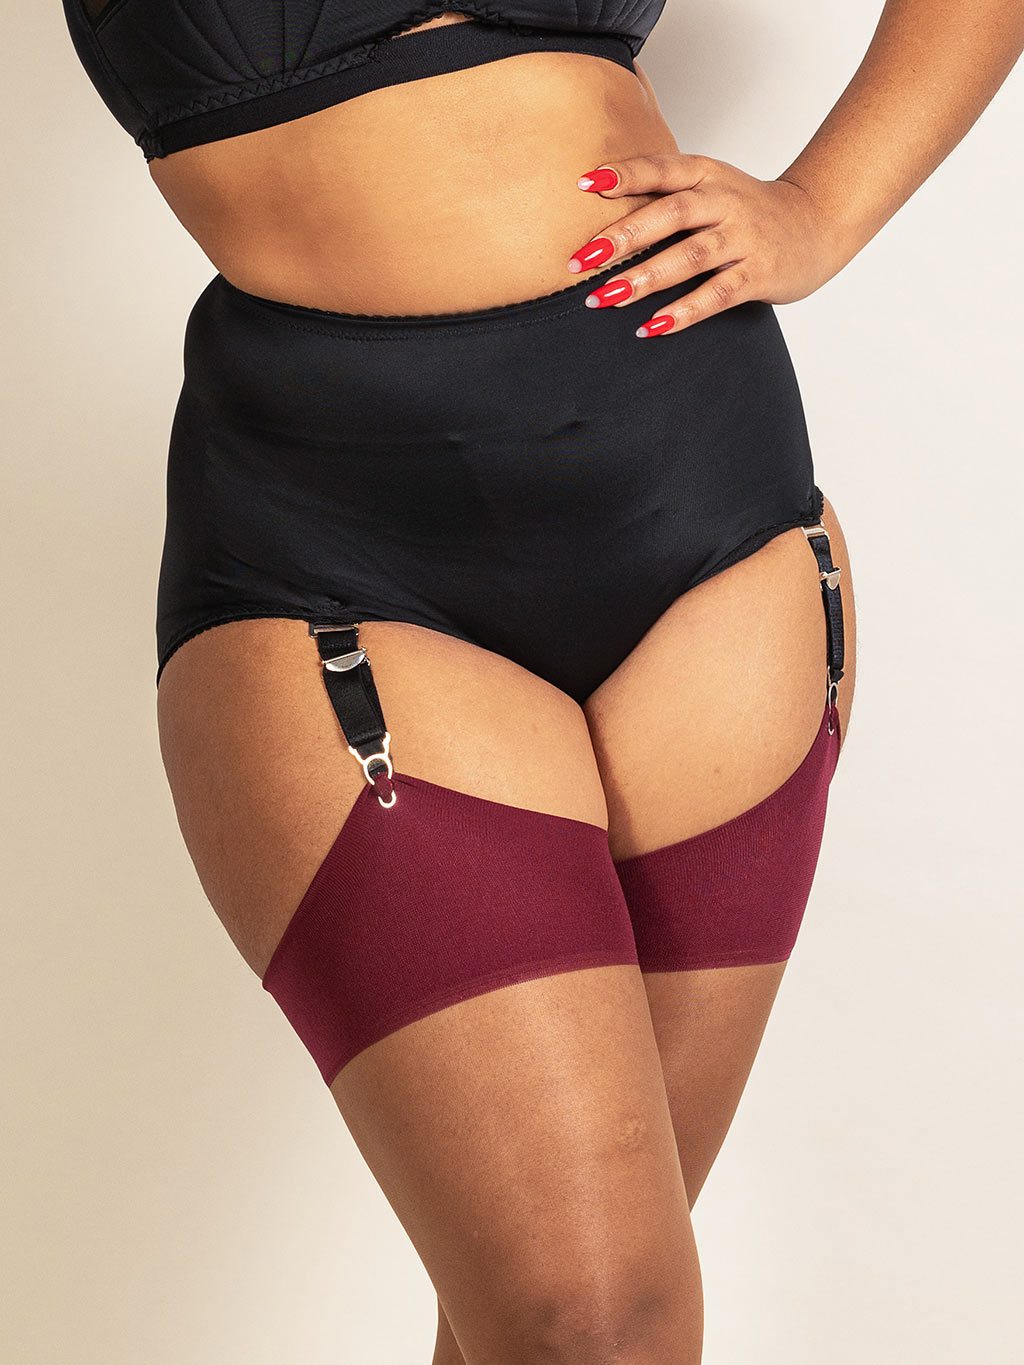 Retro black suspender knickers by What Katie Did. Made from a matte stretch recycled fabric with 4 detachable suspender straps so they can be worn with or without stockings.